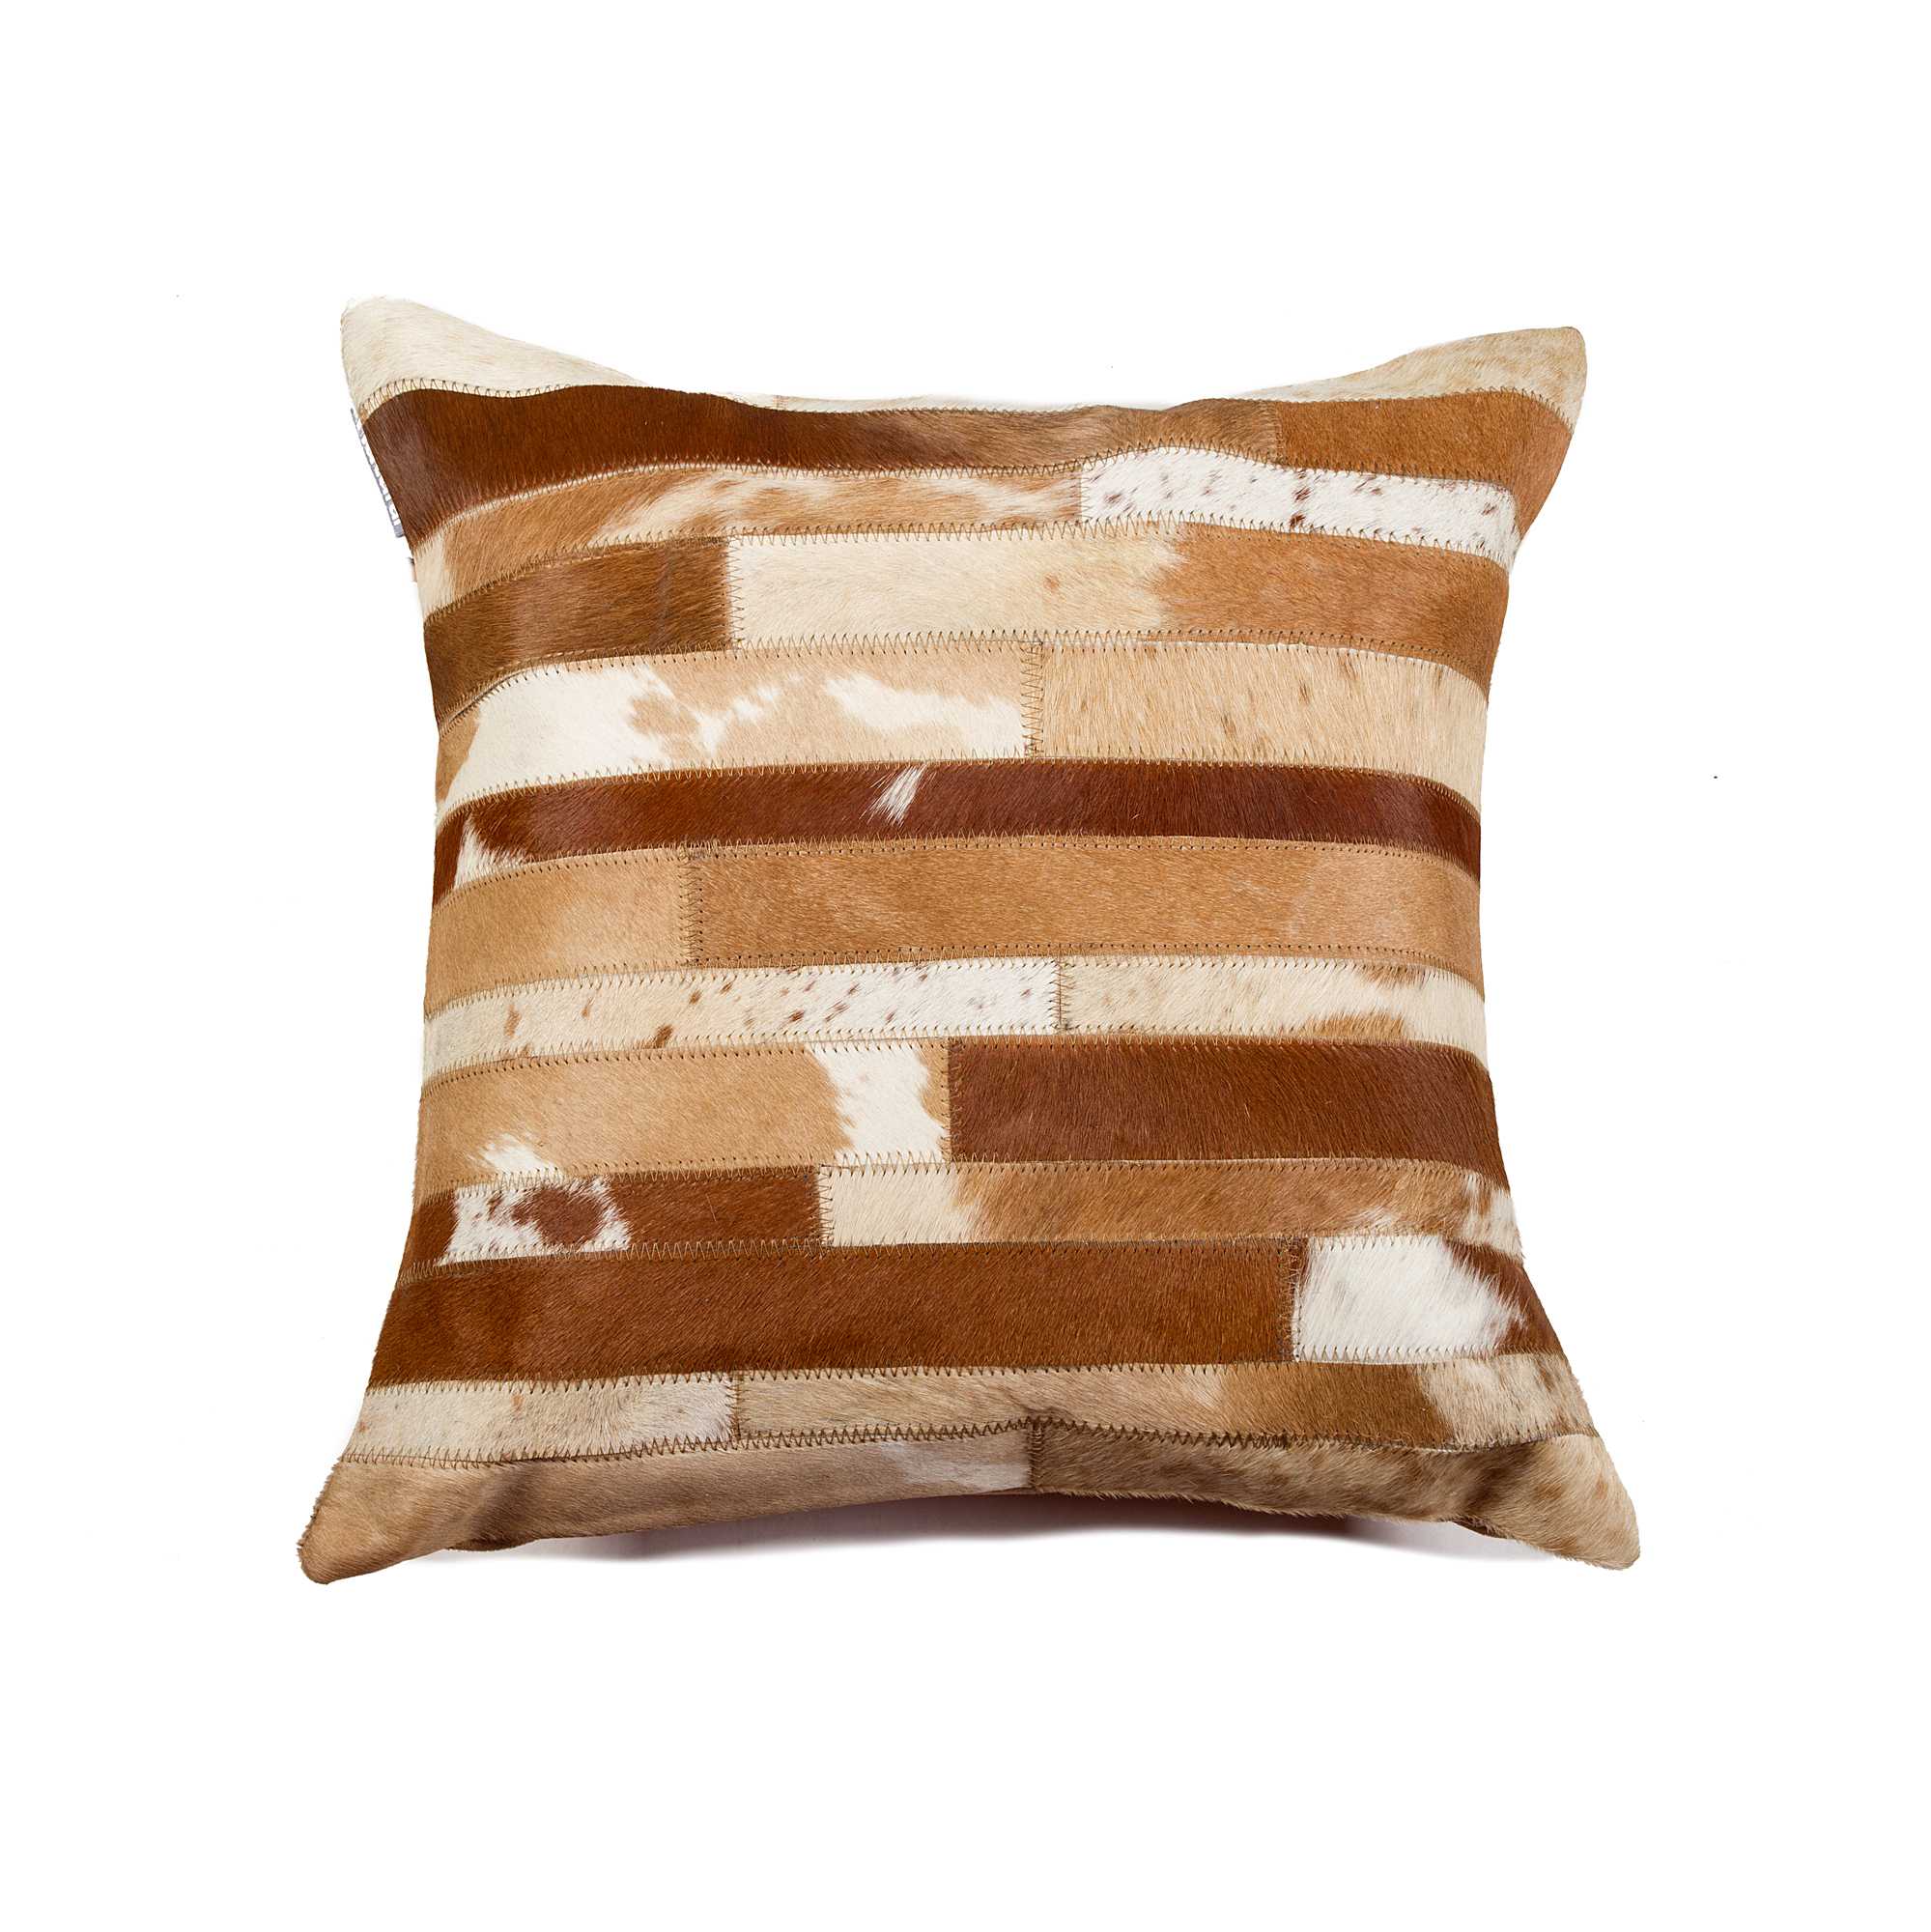 18" Brown and White Cowhide Throw Pillow